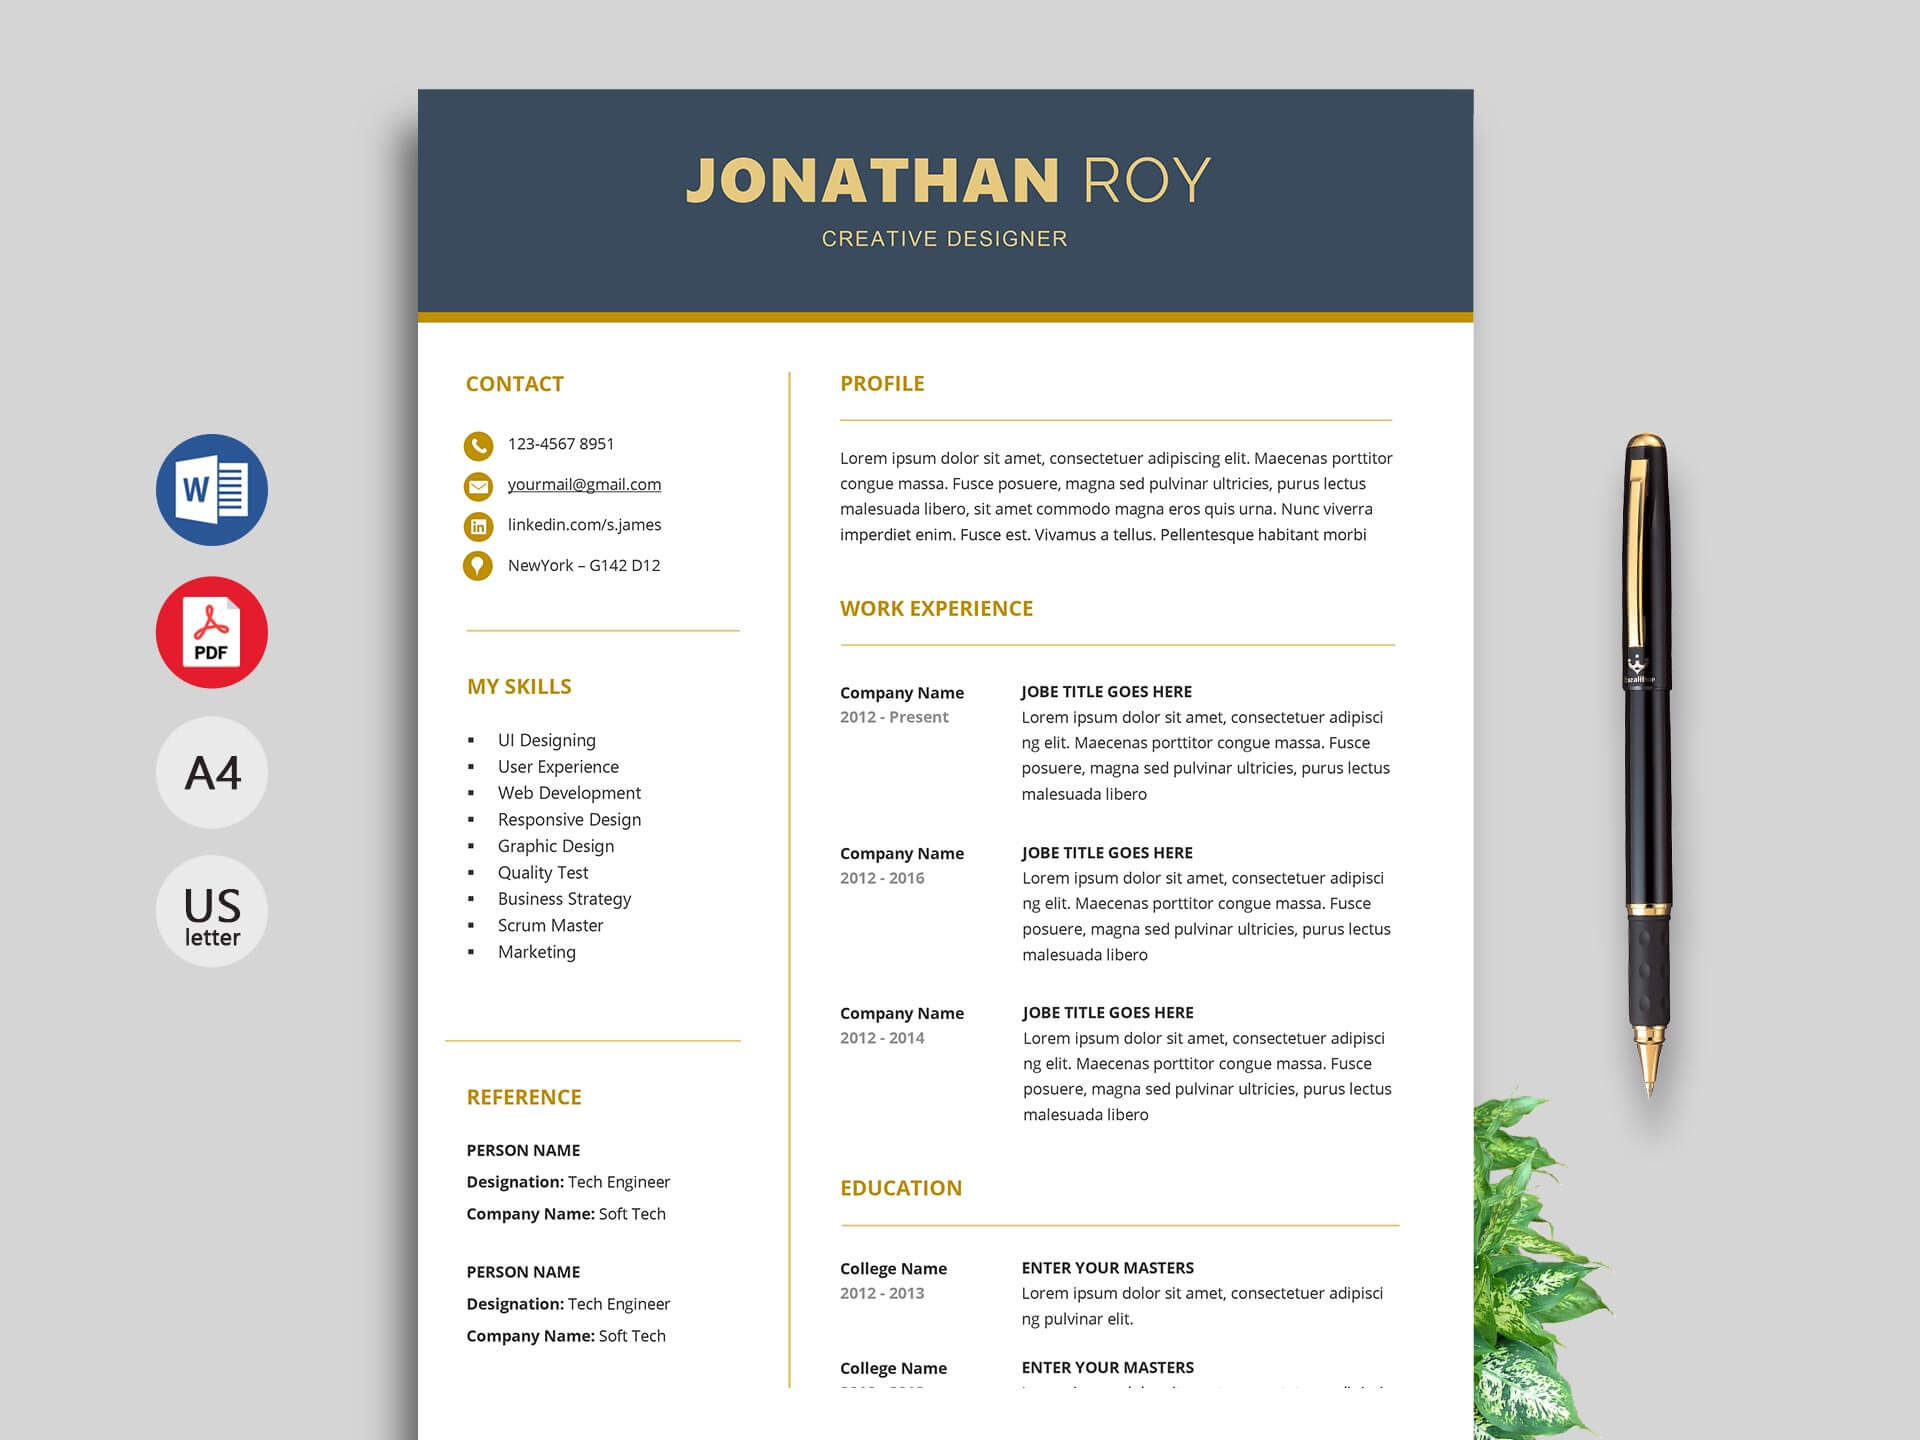 Free Simple Resume & Cv Templates Word Format 2020 | Resumekraft With How To Find A Resume Template On Word